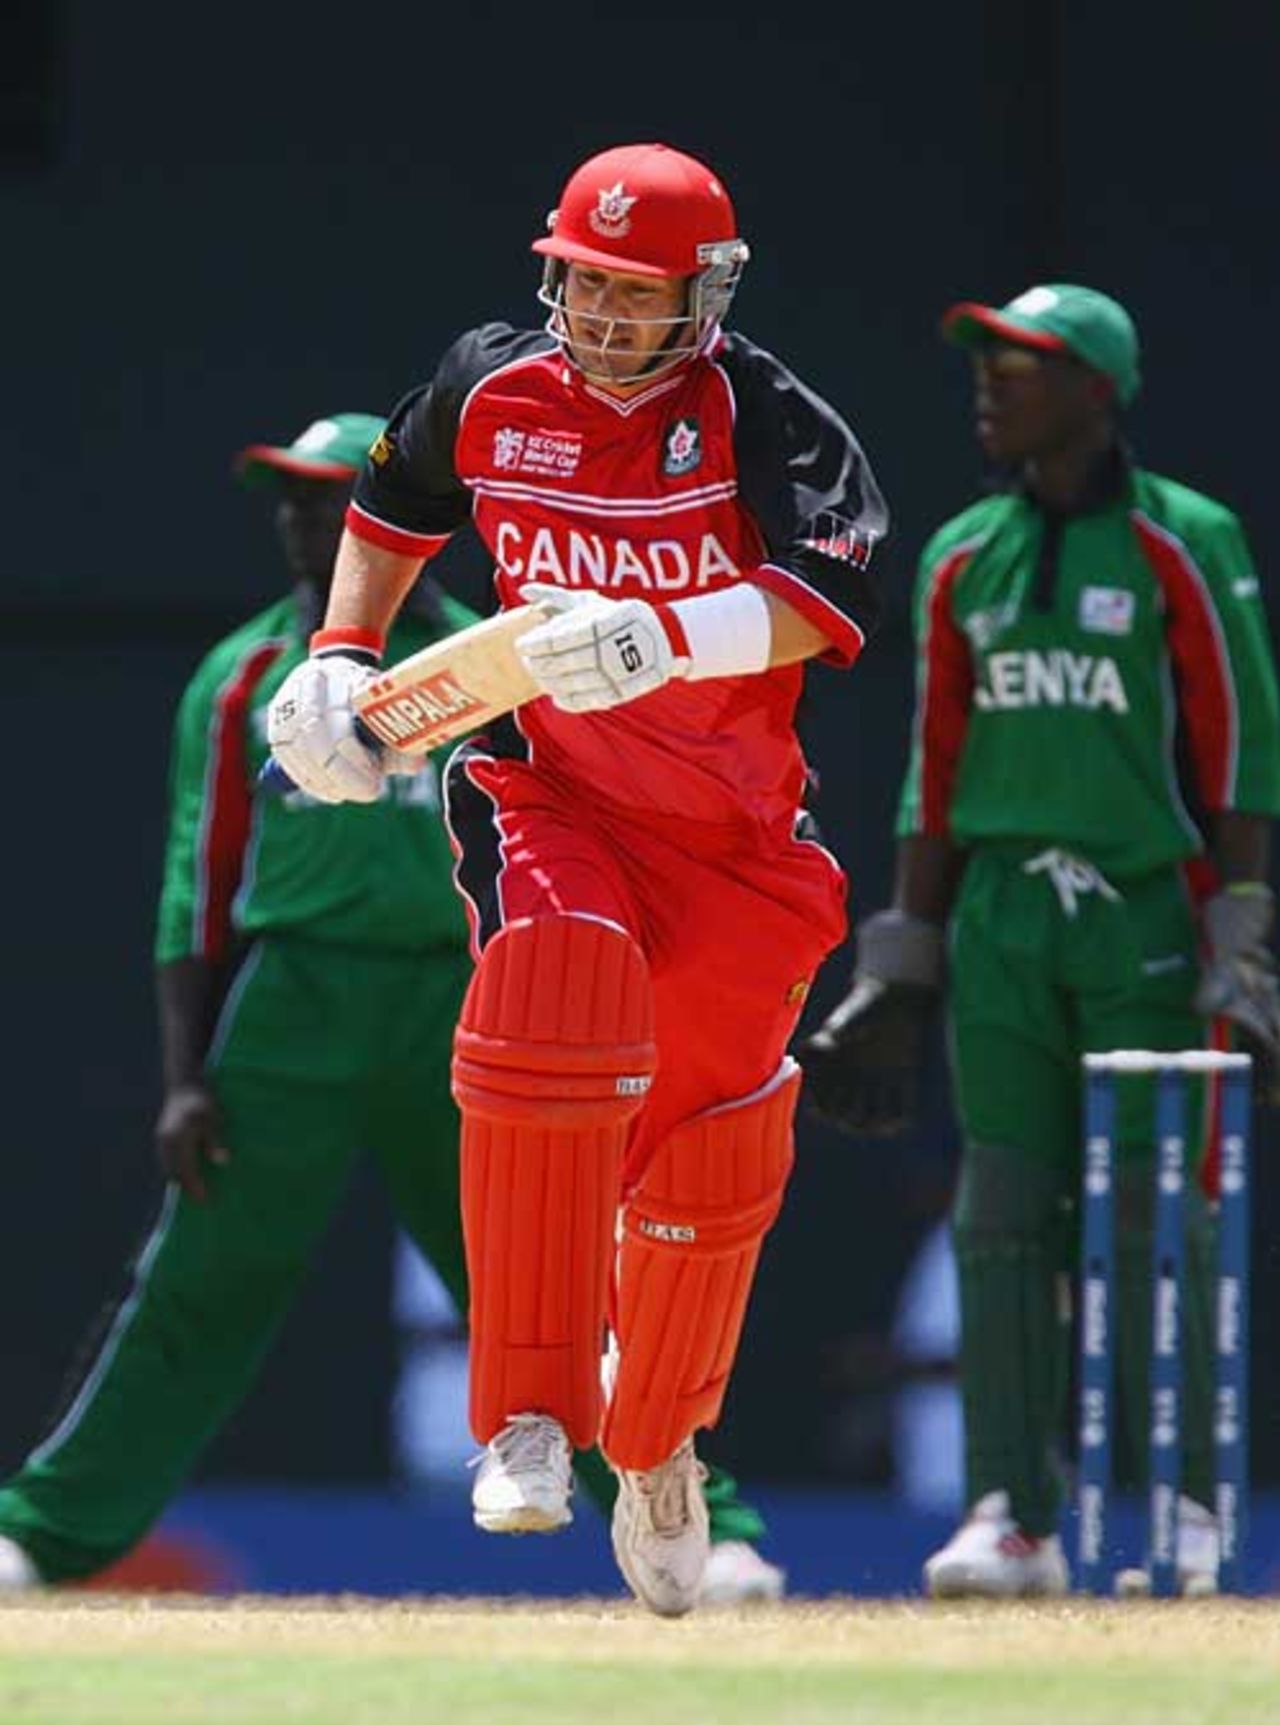 Ian Billcliff made 34 before falling to Jimmy Kamande, Kenya v Canada, World Cup, Group C, St Lucia, March 14, 2007